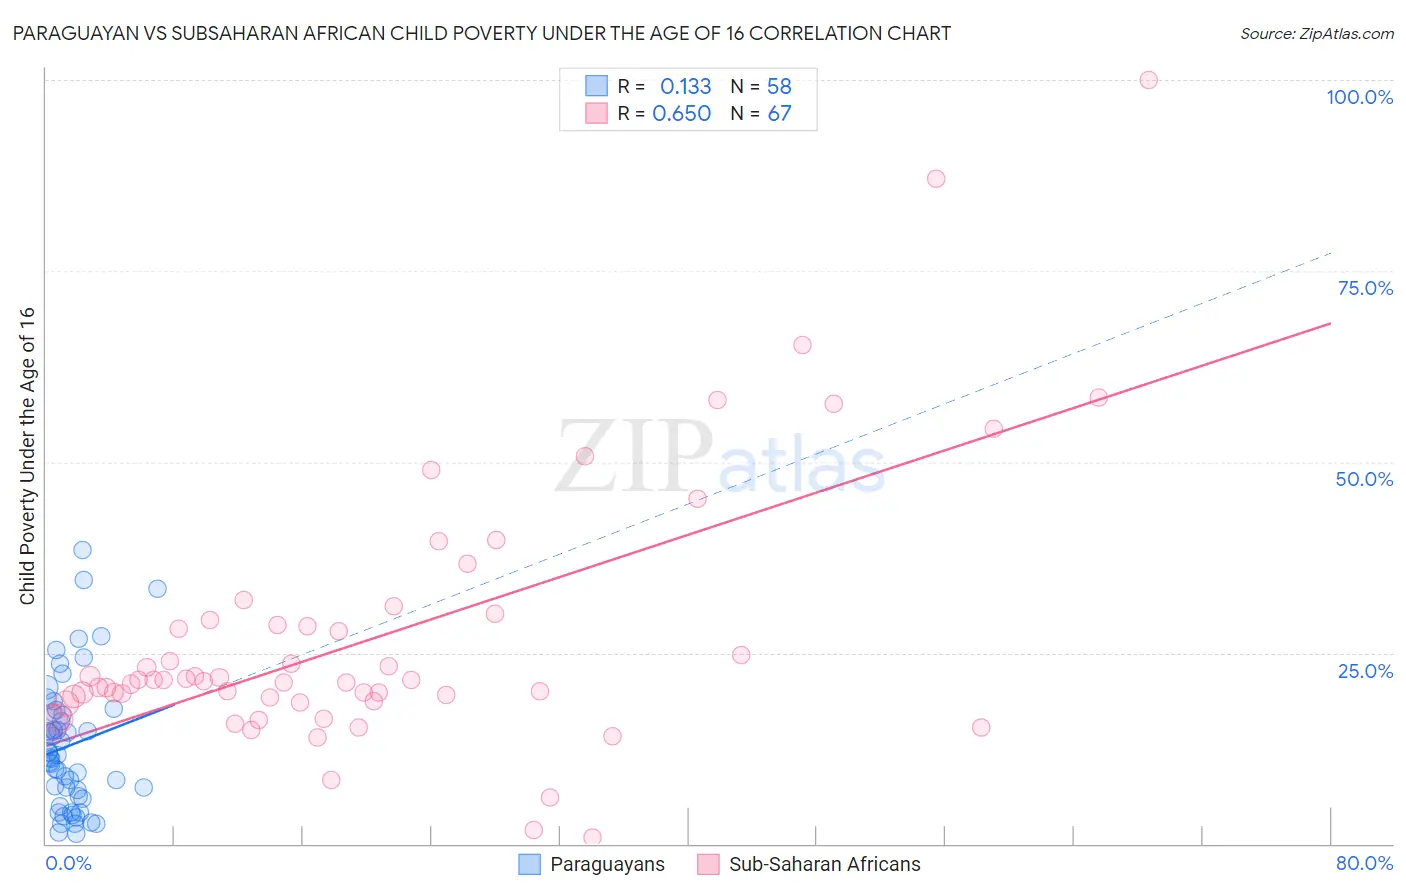 Paraguayan vs Subsaharan African Child Poverty Under the Age of 16